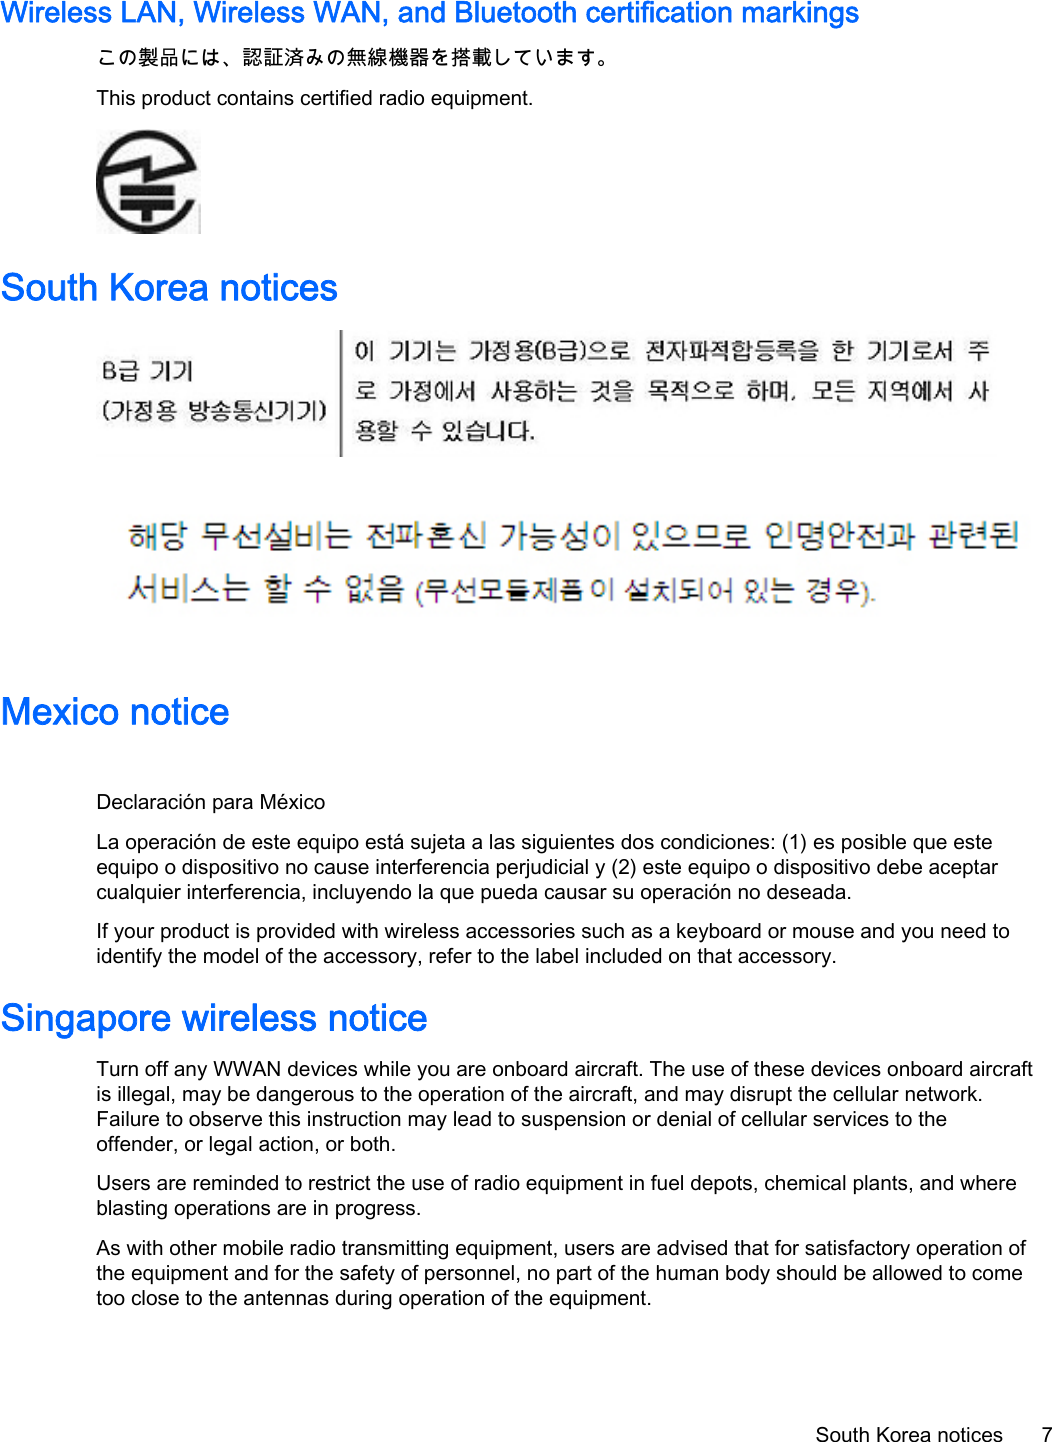 Wireless LAN, Wireless WAN, and Bluetooth certification markingsこの製品には、認証済みの無線機器を搭載しています。This product contains certified radio equipment.South Korea noticesMexico noticeDeclaración para MéxicoLa operación de este equipo está sujeta a las siguientes dos condiciones: (1) es posible que esteequipo o dispositivo no cause interferencia perjudicial y (2) este equipo o dispositivo debe aceptarcualquier interferencia, incluyendo la que pueda causar su operación no deseada.If your product is provided with wireless accessories such as a keyboard or mouse and you need toidentify the model of the accessory, refer to the label included on that accessory.Singapore wireless noticeTurn off any WWAN devices while you are onboard aircraft. The use of these devices onboard aircraftis illegal, may be dangerous to the operation of the aircraft, and may disrupt the cellular network.Failure to observe this instruction may lead to suspension or denial of cellular services to theoffender, or legal action, or both.Users are reminded to restrict the use of radio equipment in fuel depots, chemical plants, and whereblasting operations are in progress.As with other mobile radio transmitting equipment, users are advised that for satisfactory operation ofthe equipment and for the safety of personnel, no part of the human body should be allowed to cometoo close to the antennas during operation of the equipment.South Korea notices 7